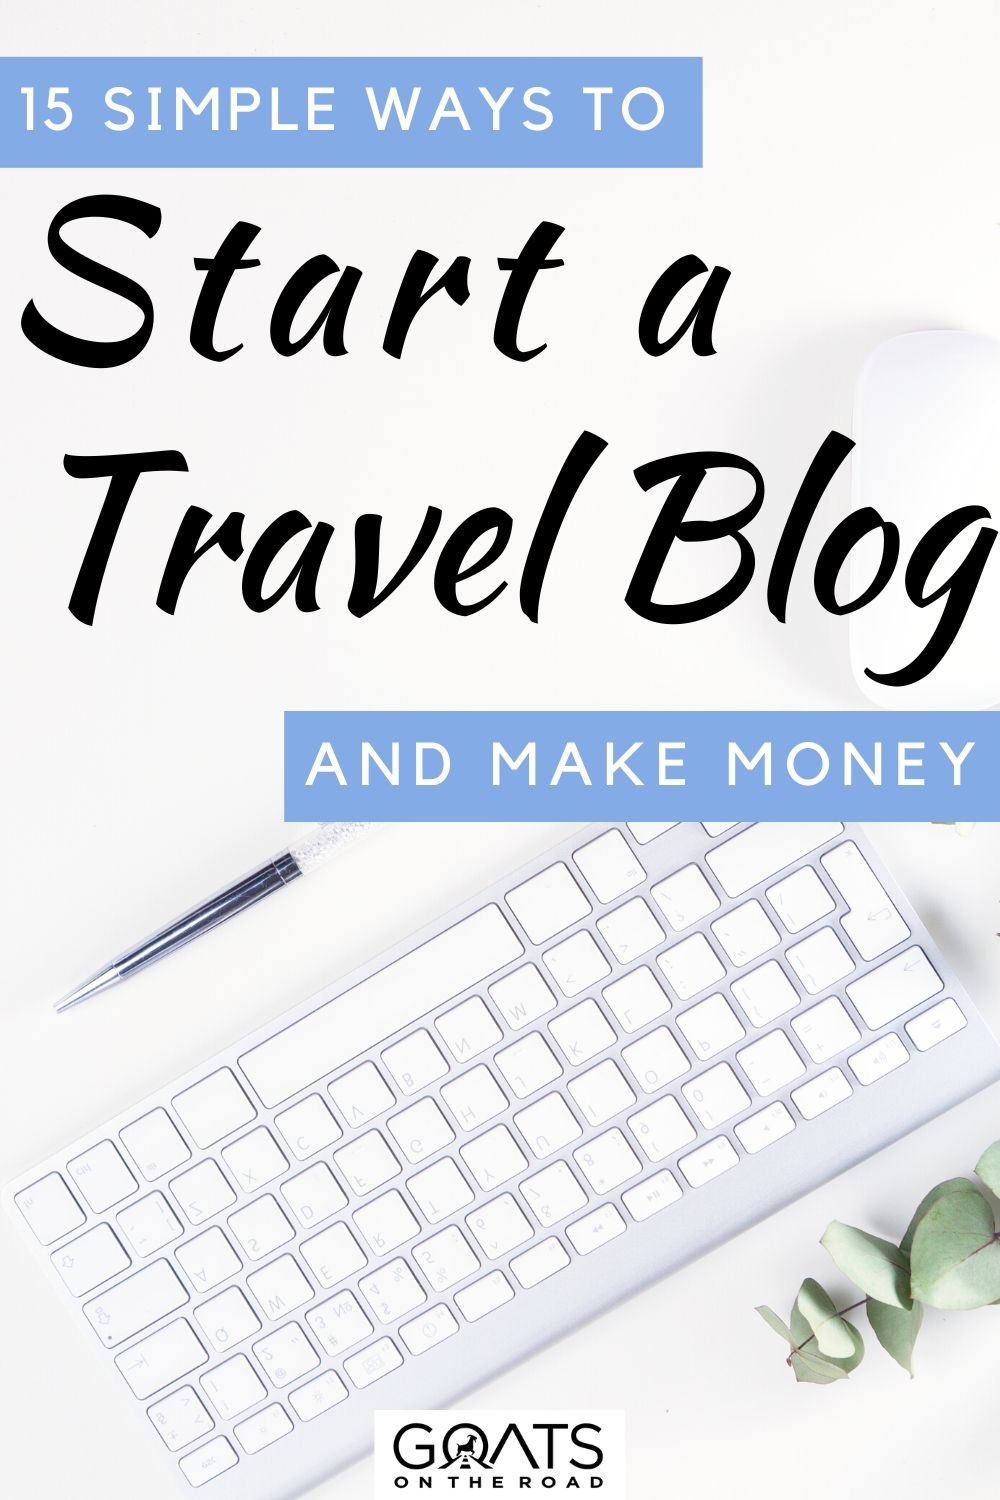 “15 Simple Ways to Start a Travel Blog And Make Money